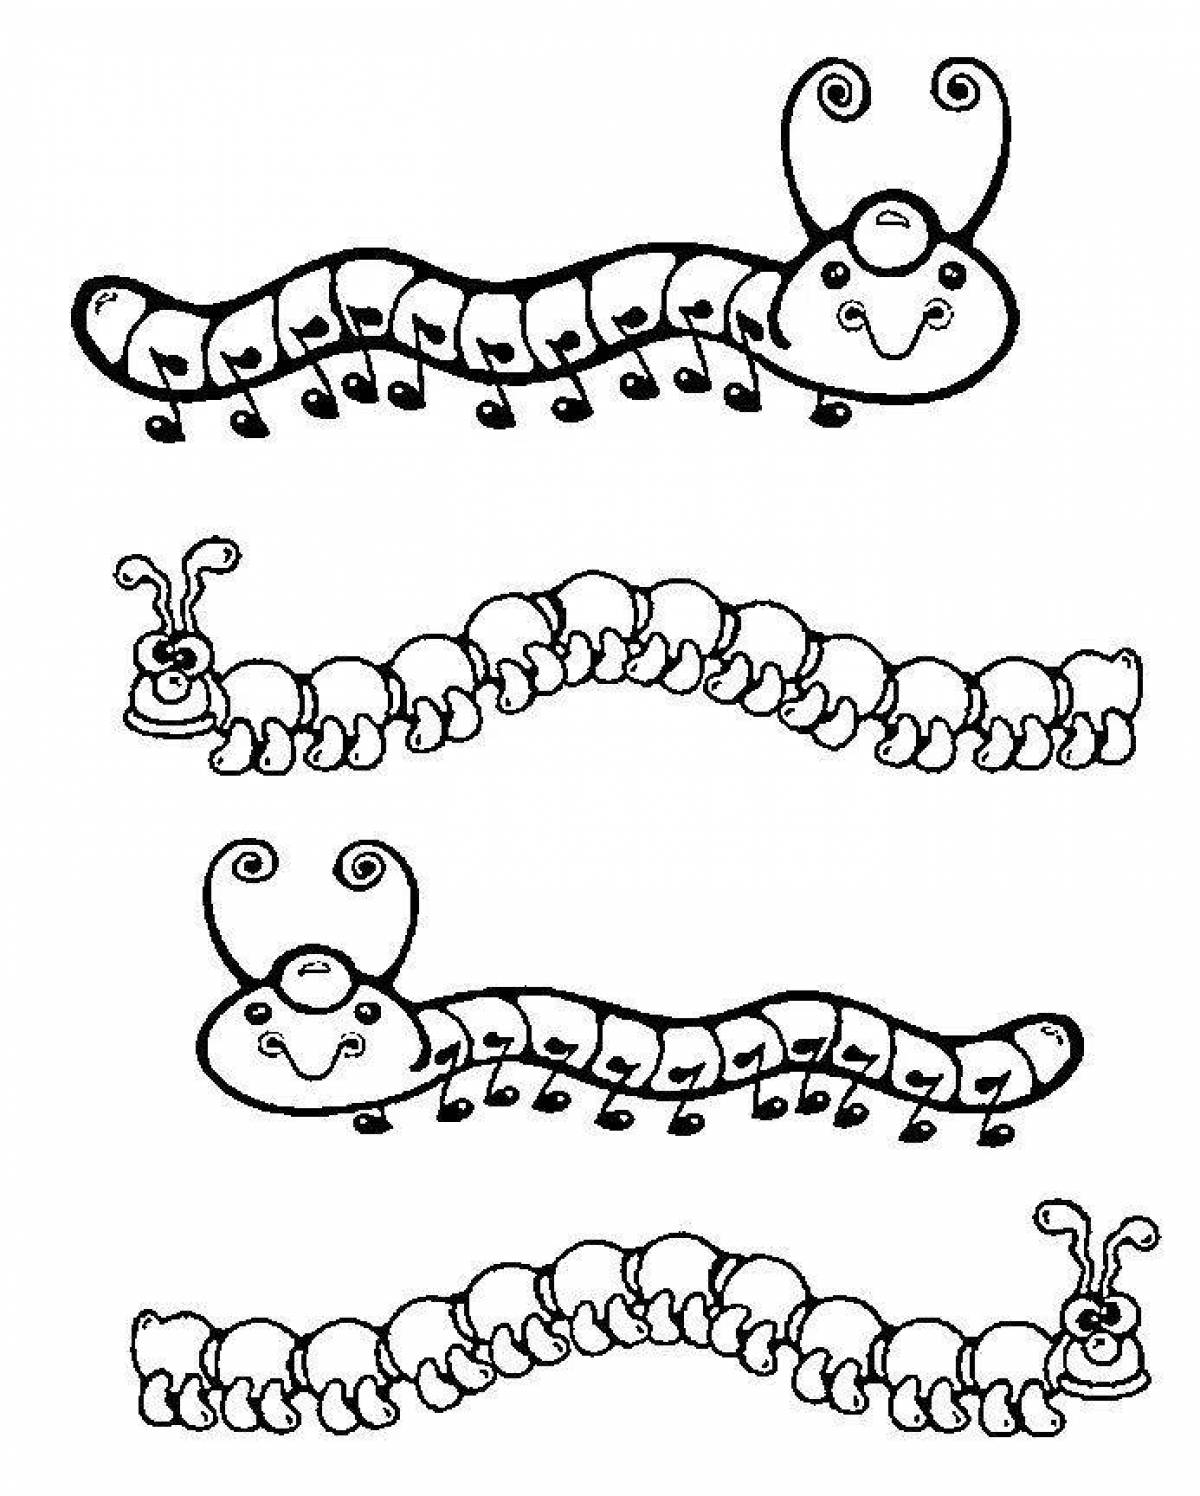 Bright dog caterpillar coloring page